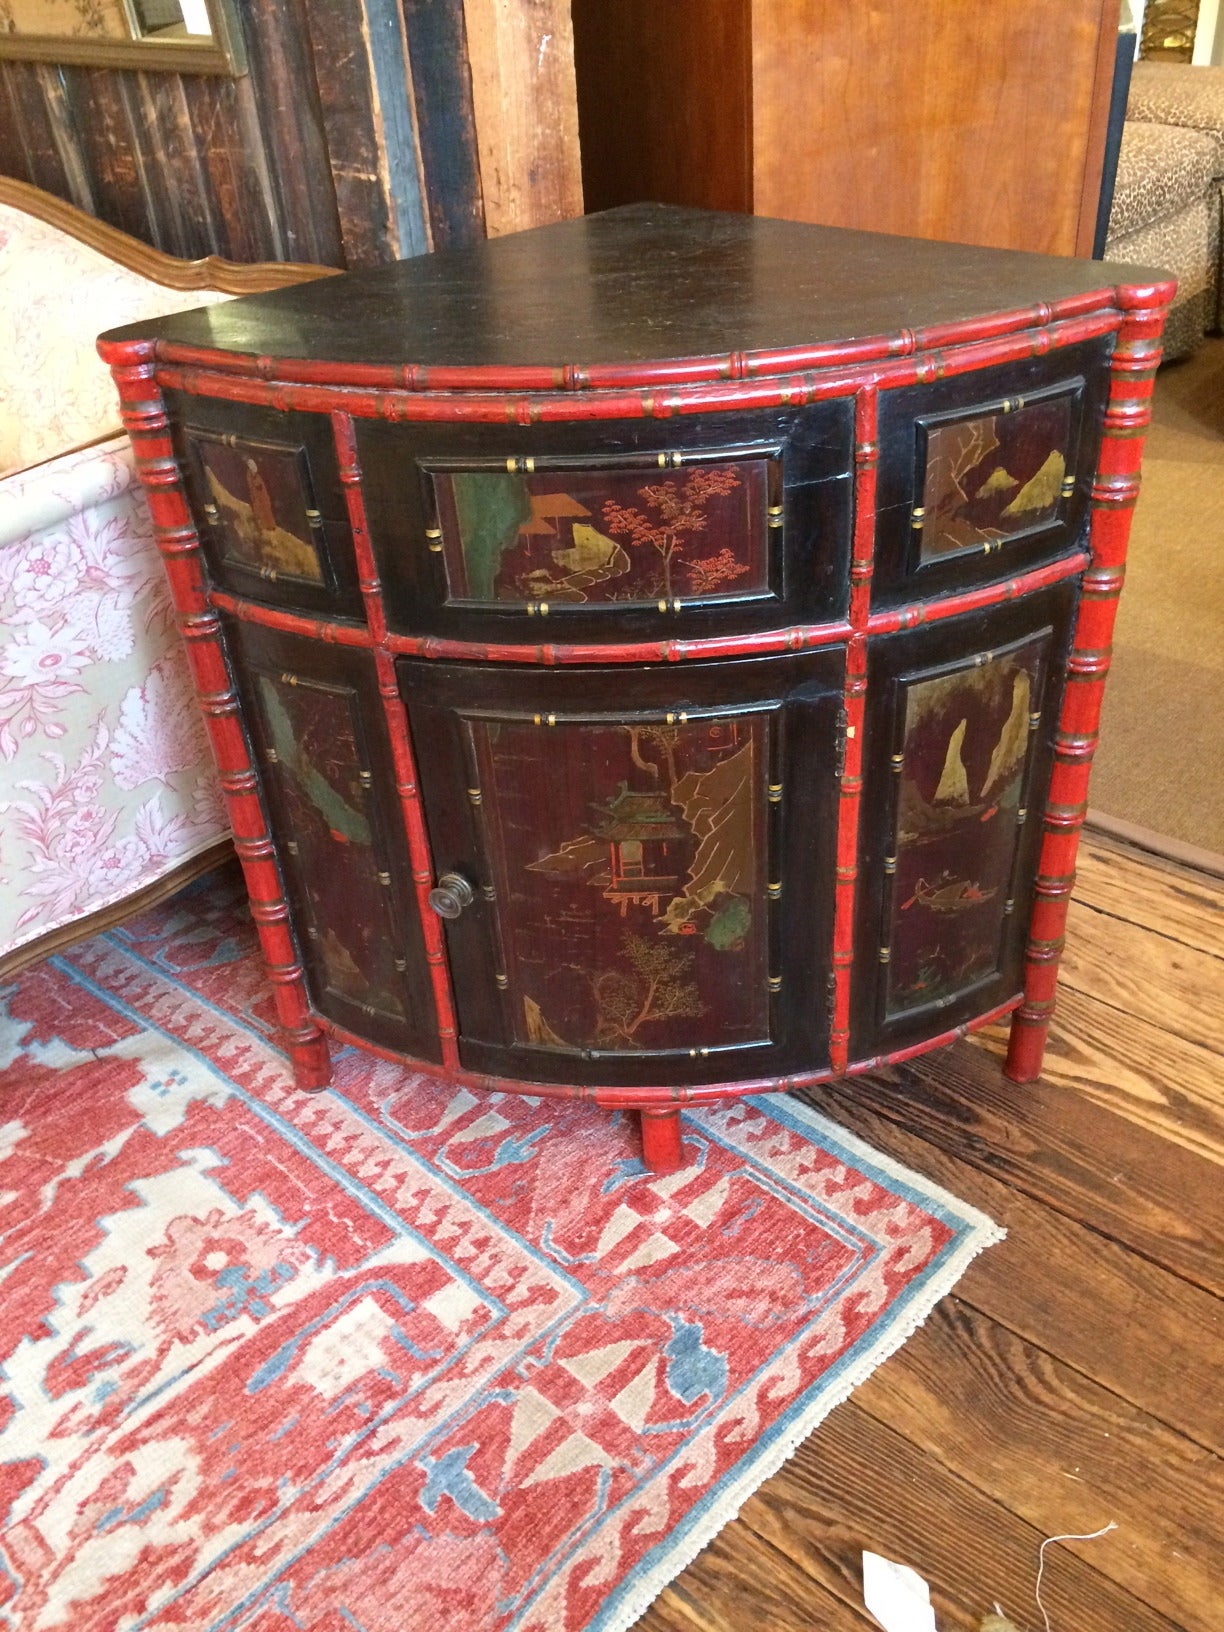 Elegant pair of corner cabinets, hand-painted chinoiserie style in black, red, green and gold. Faux bamboo periphery is tomato red and gold. Inside interior has one shelf.